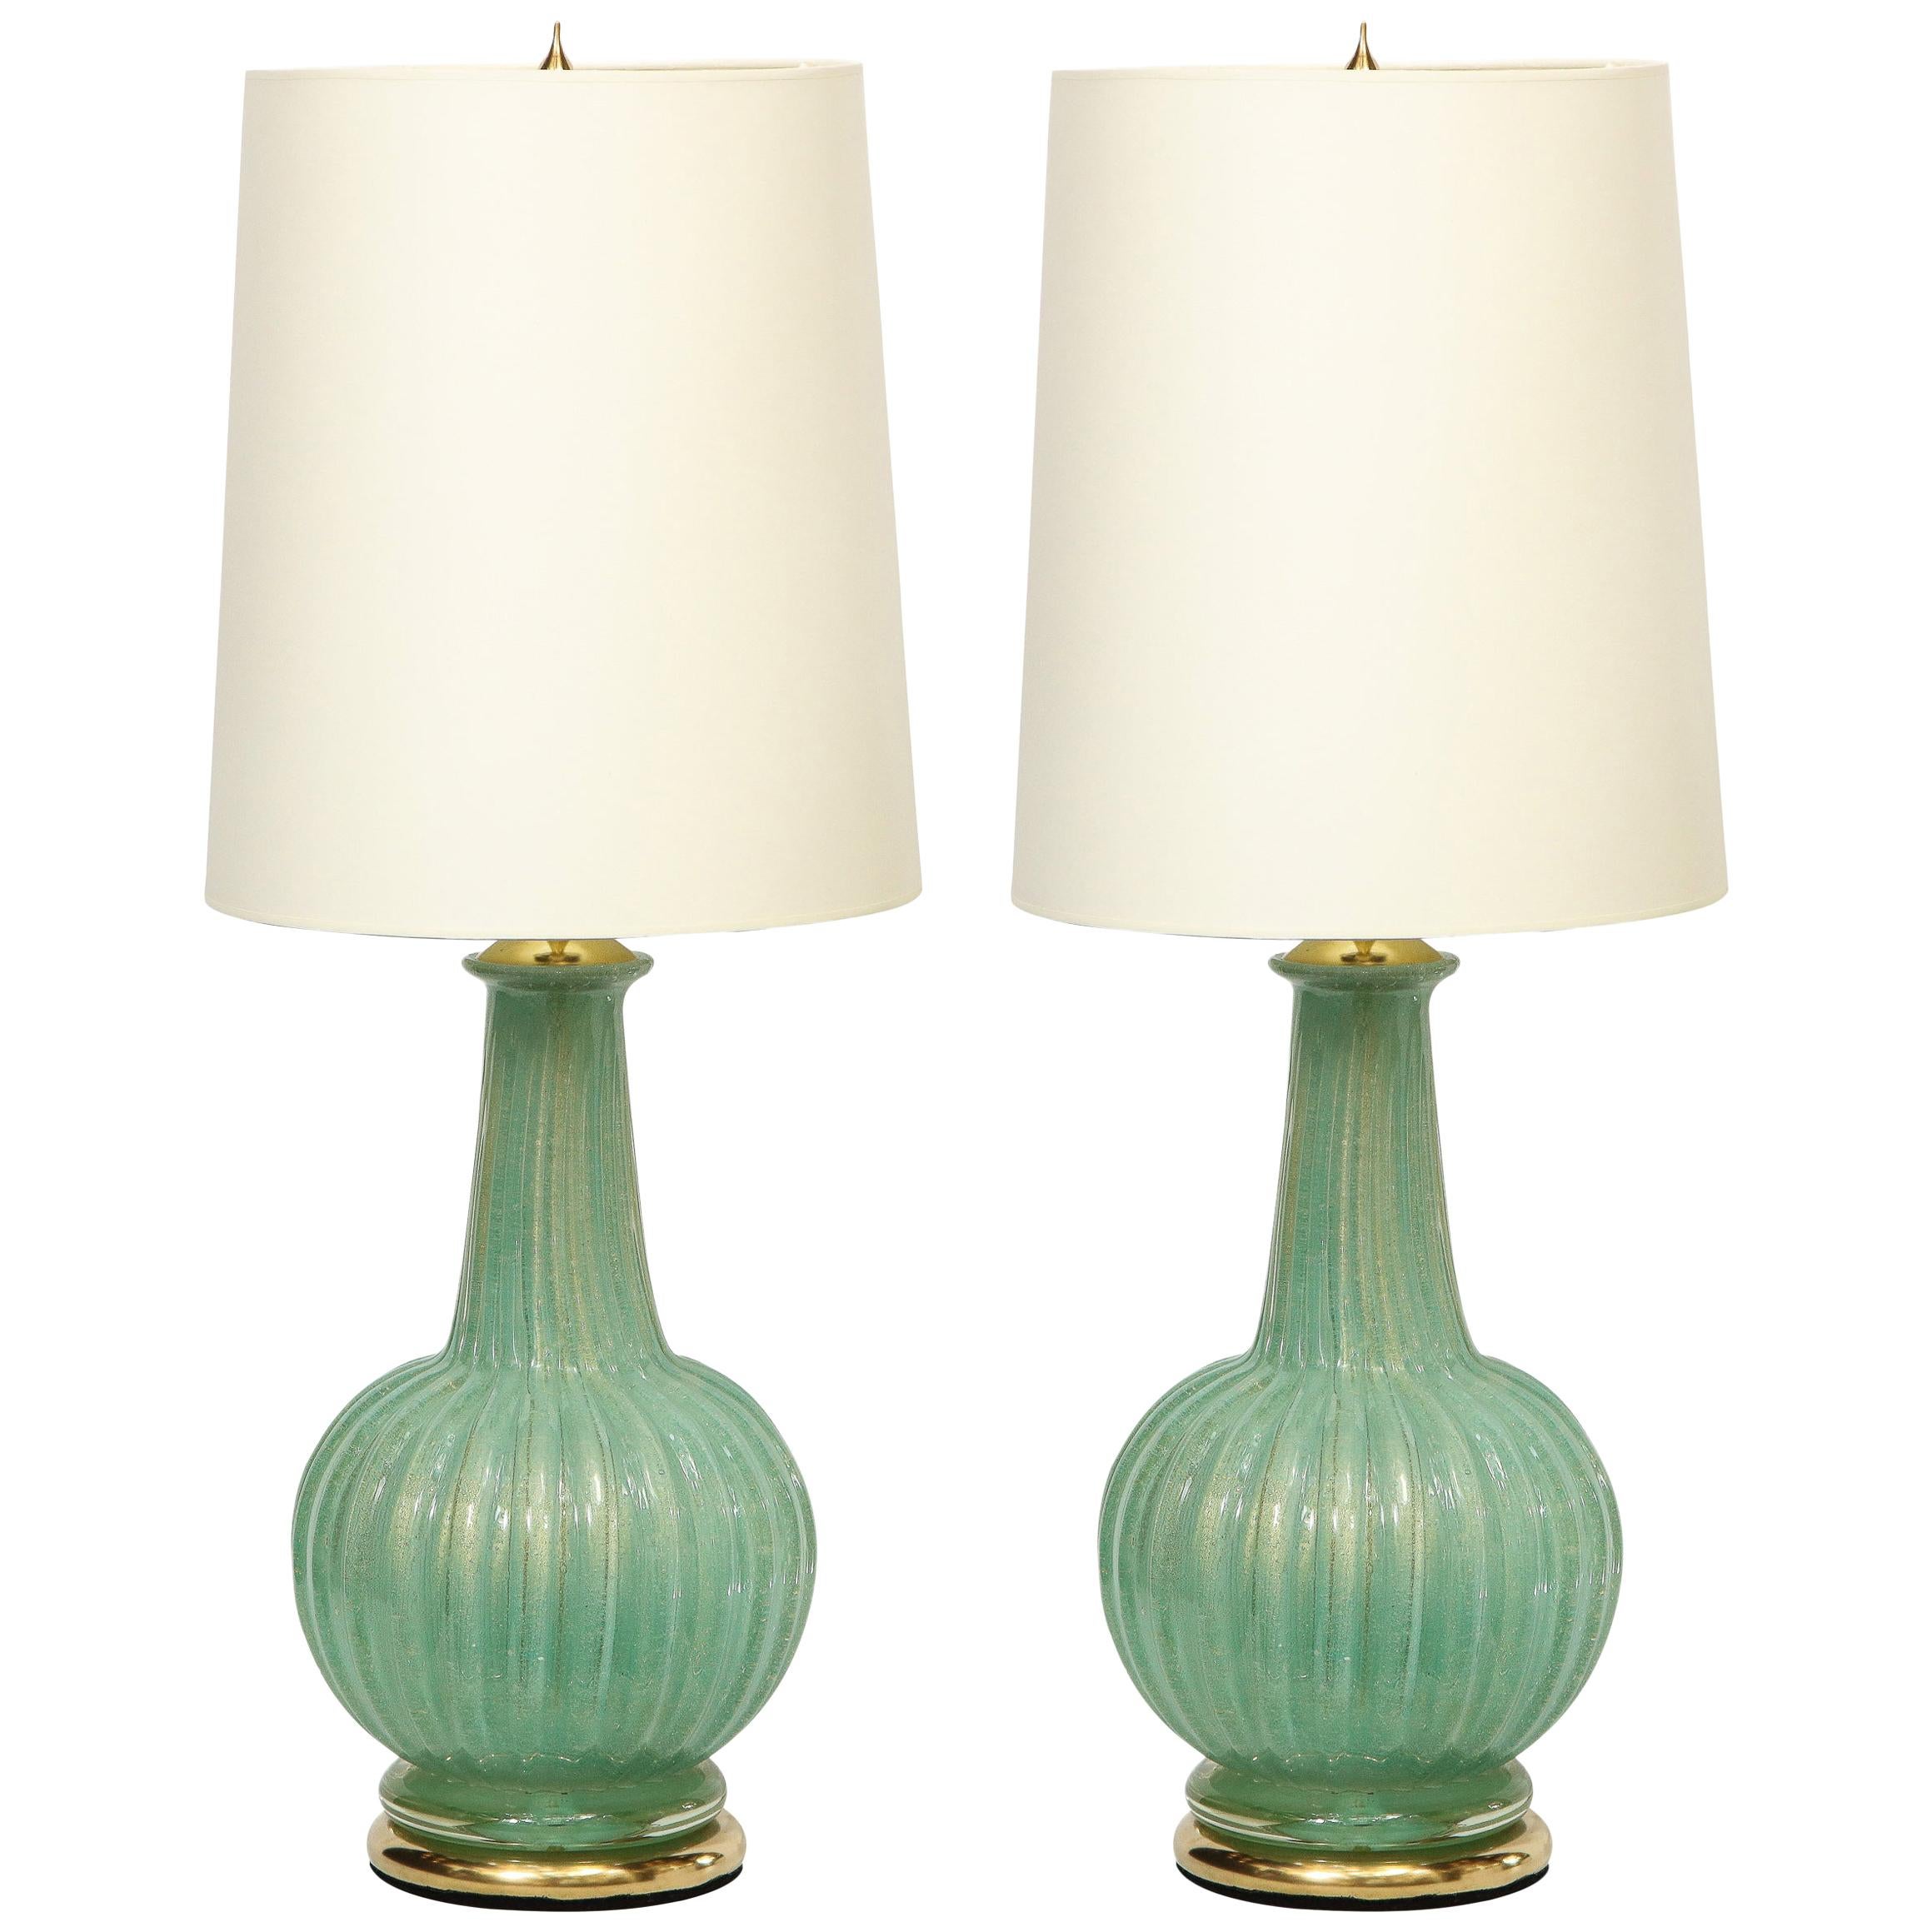 Pair of Midcentury Channeled Table Lamps with Brass Detailing, Barovier e Toso